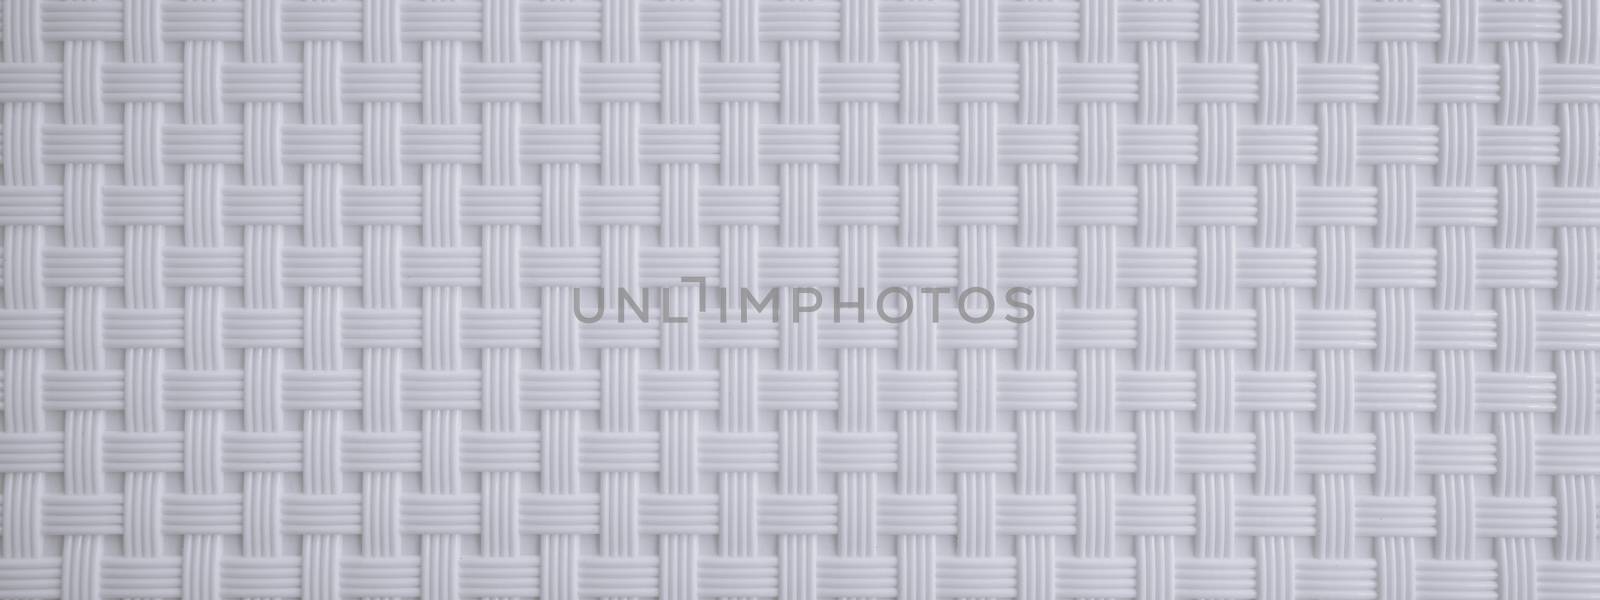 Texture of white weave background. by gutarphotoghaphy